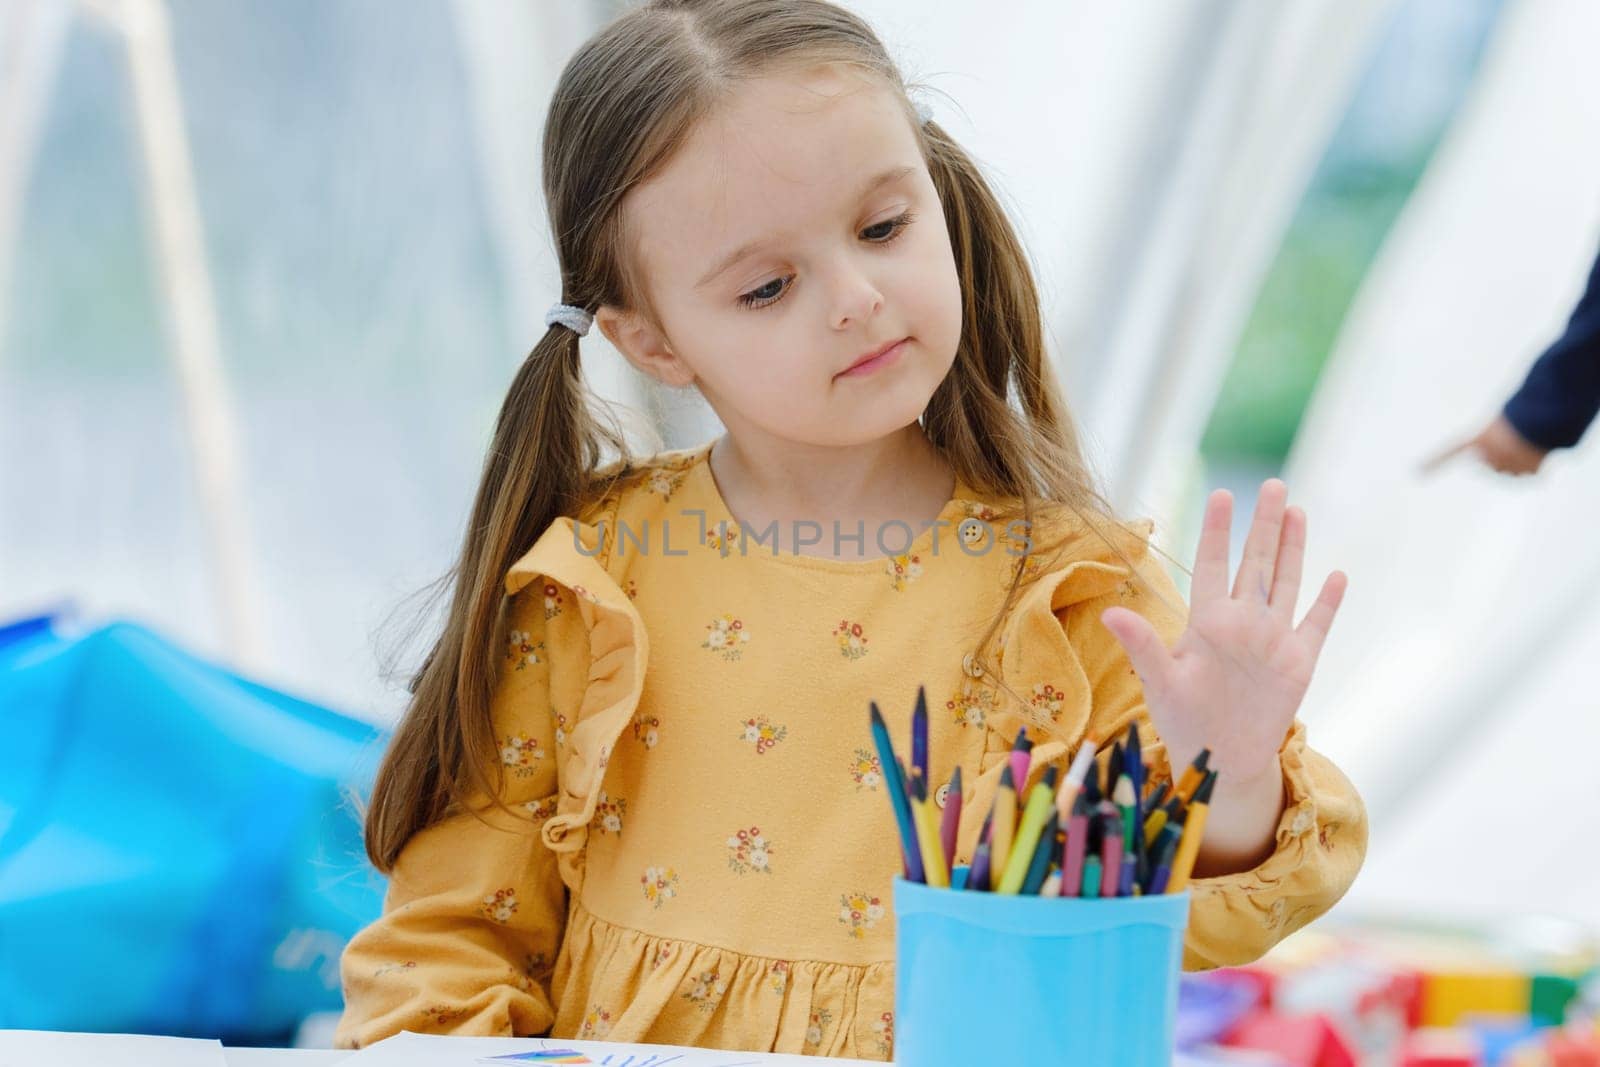 Cute european kid girl painting with colored pencil. Kindergarten children education concept.